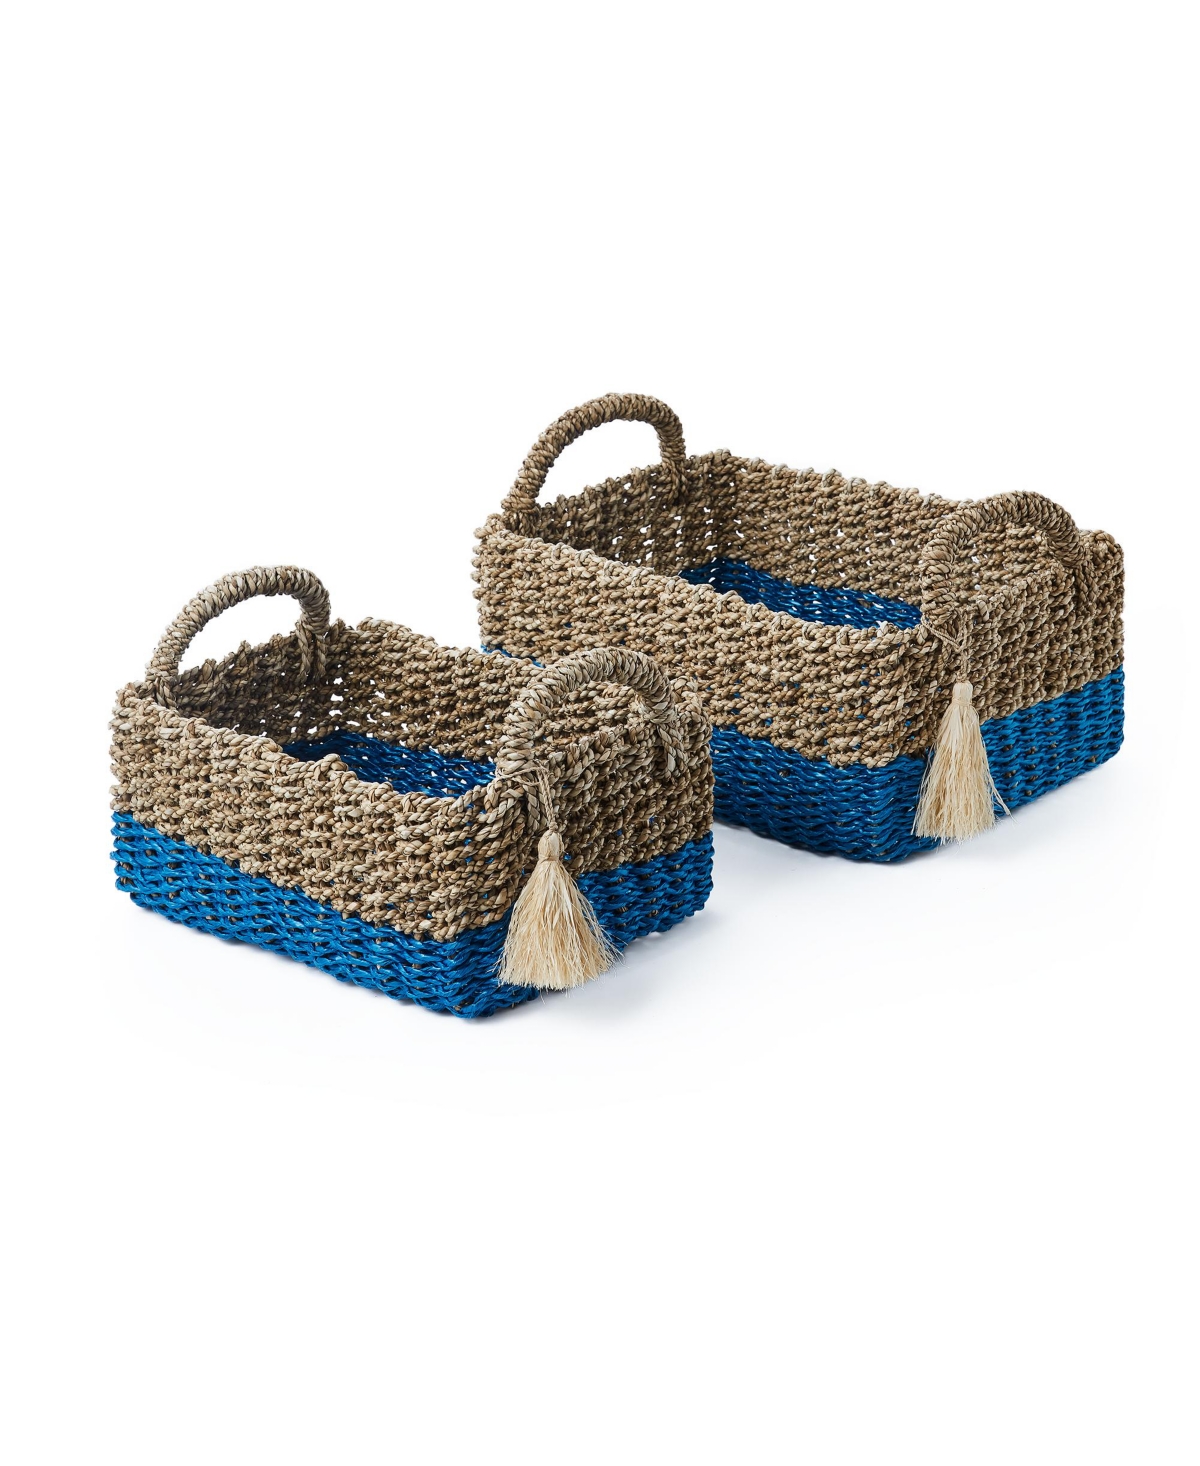 2 Piece Large Rectangular Sea Grass and Raffia Bins Set with Ear Handles and Single Tassel - Natural and White